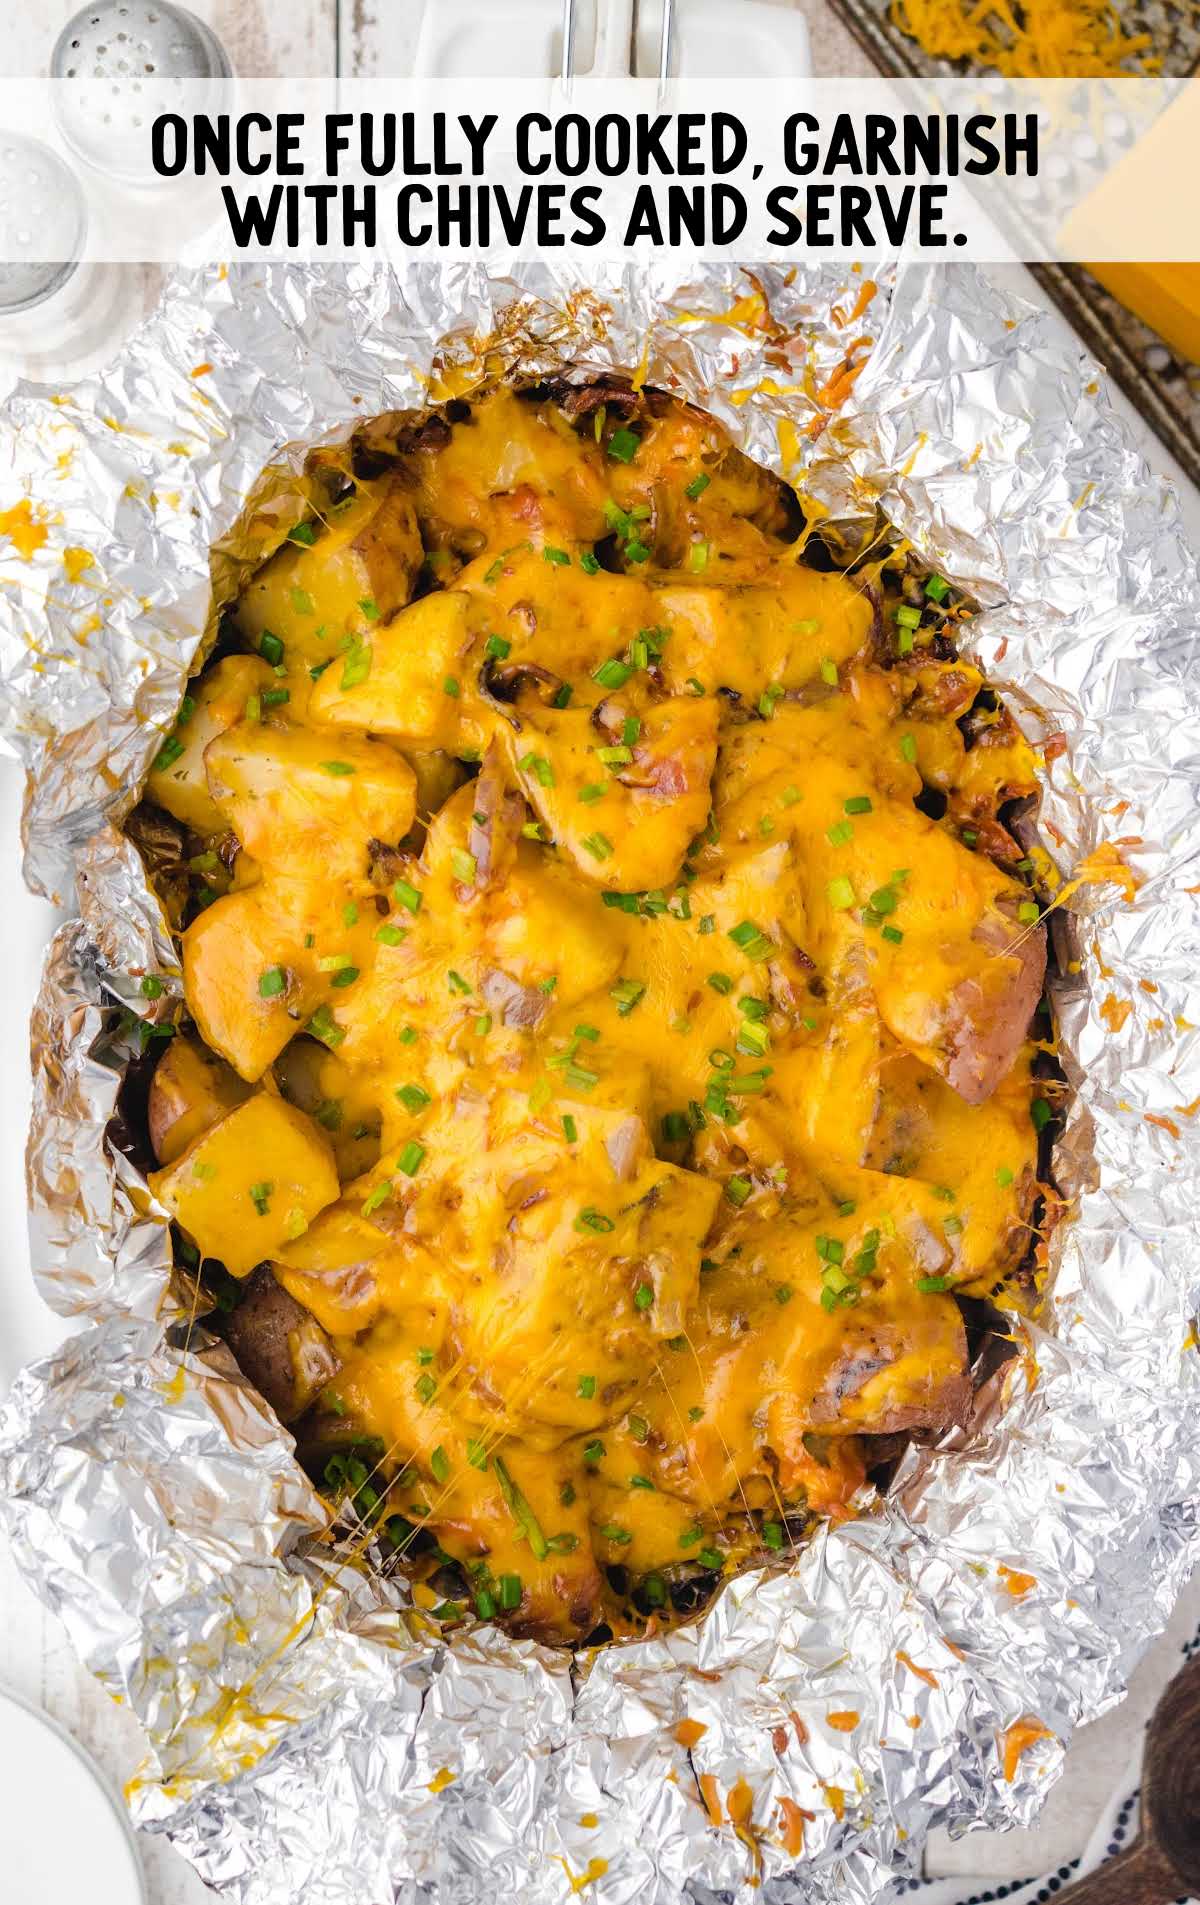 cheesy potatoes topped with chives in a crock pot